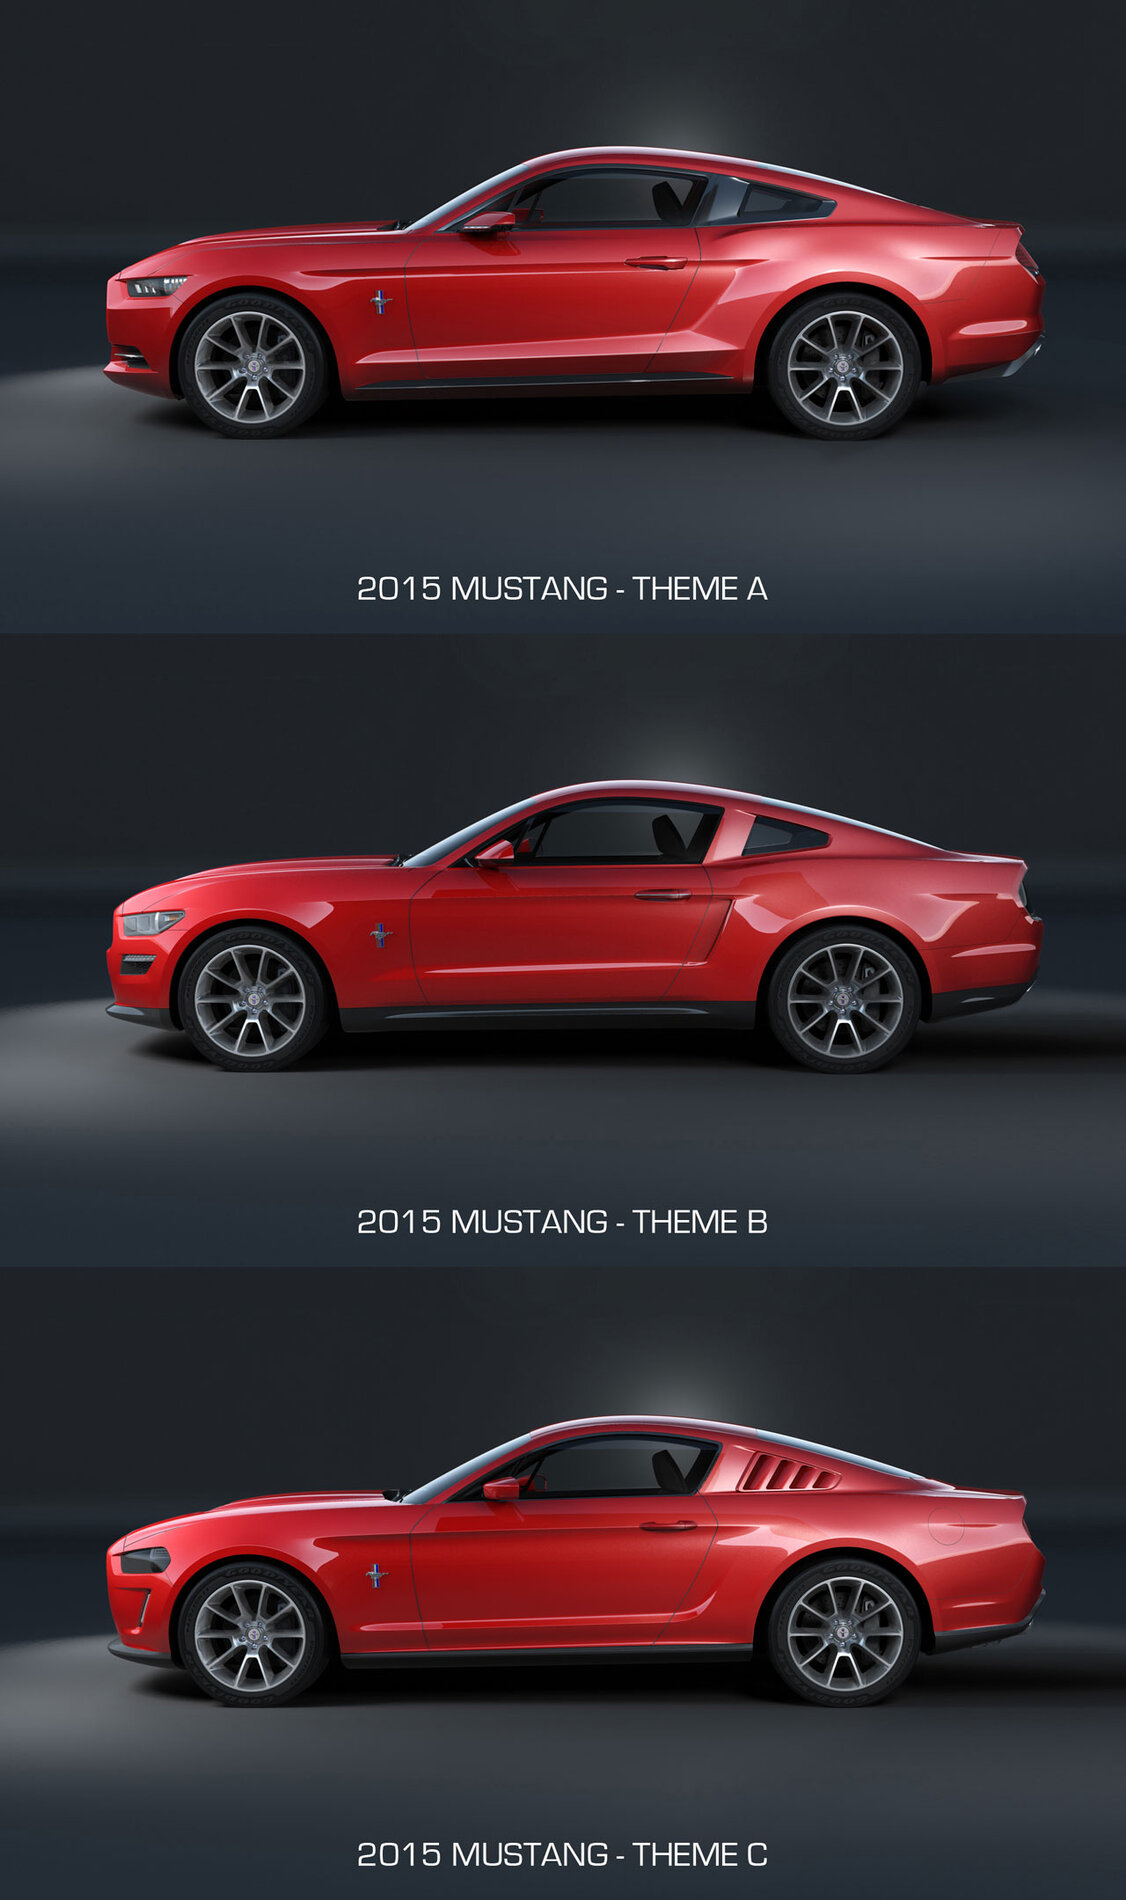 S650 Mustang S650 2023 Mustang (7th Gen) Lead Designer Revealed 04-2015-Ford-Mustang-Design-Theme-Comparison-Profile (2)